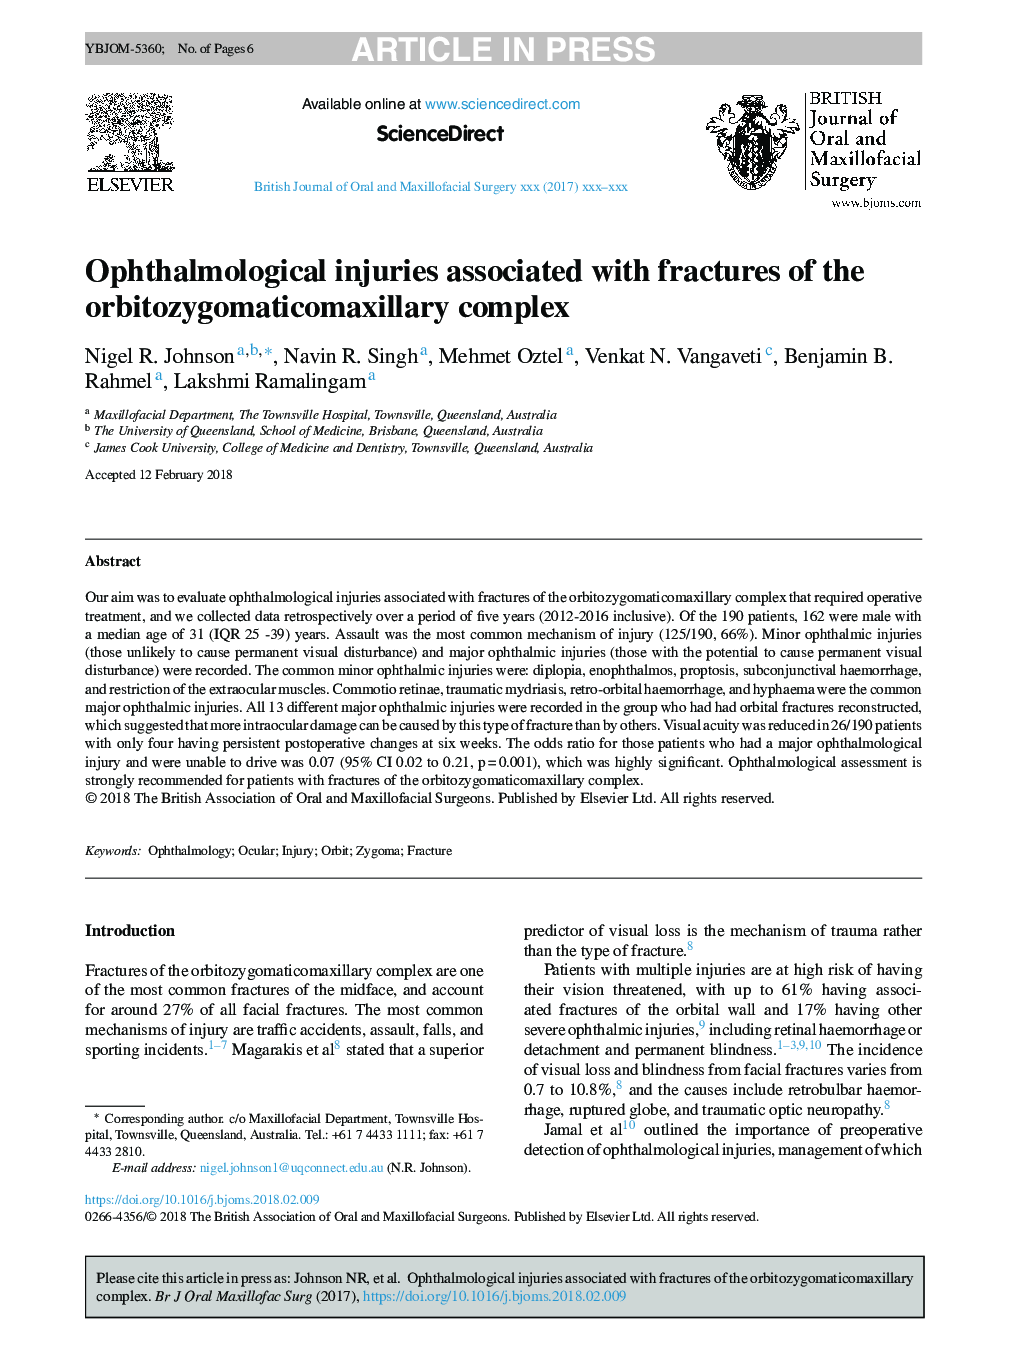 Ophthalmological injuries associated with fractures of the orbitozygomaticomaxillary complex